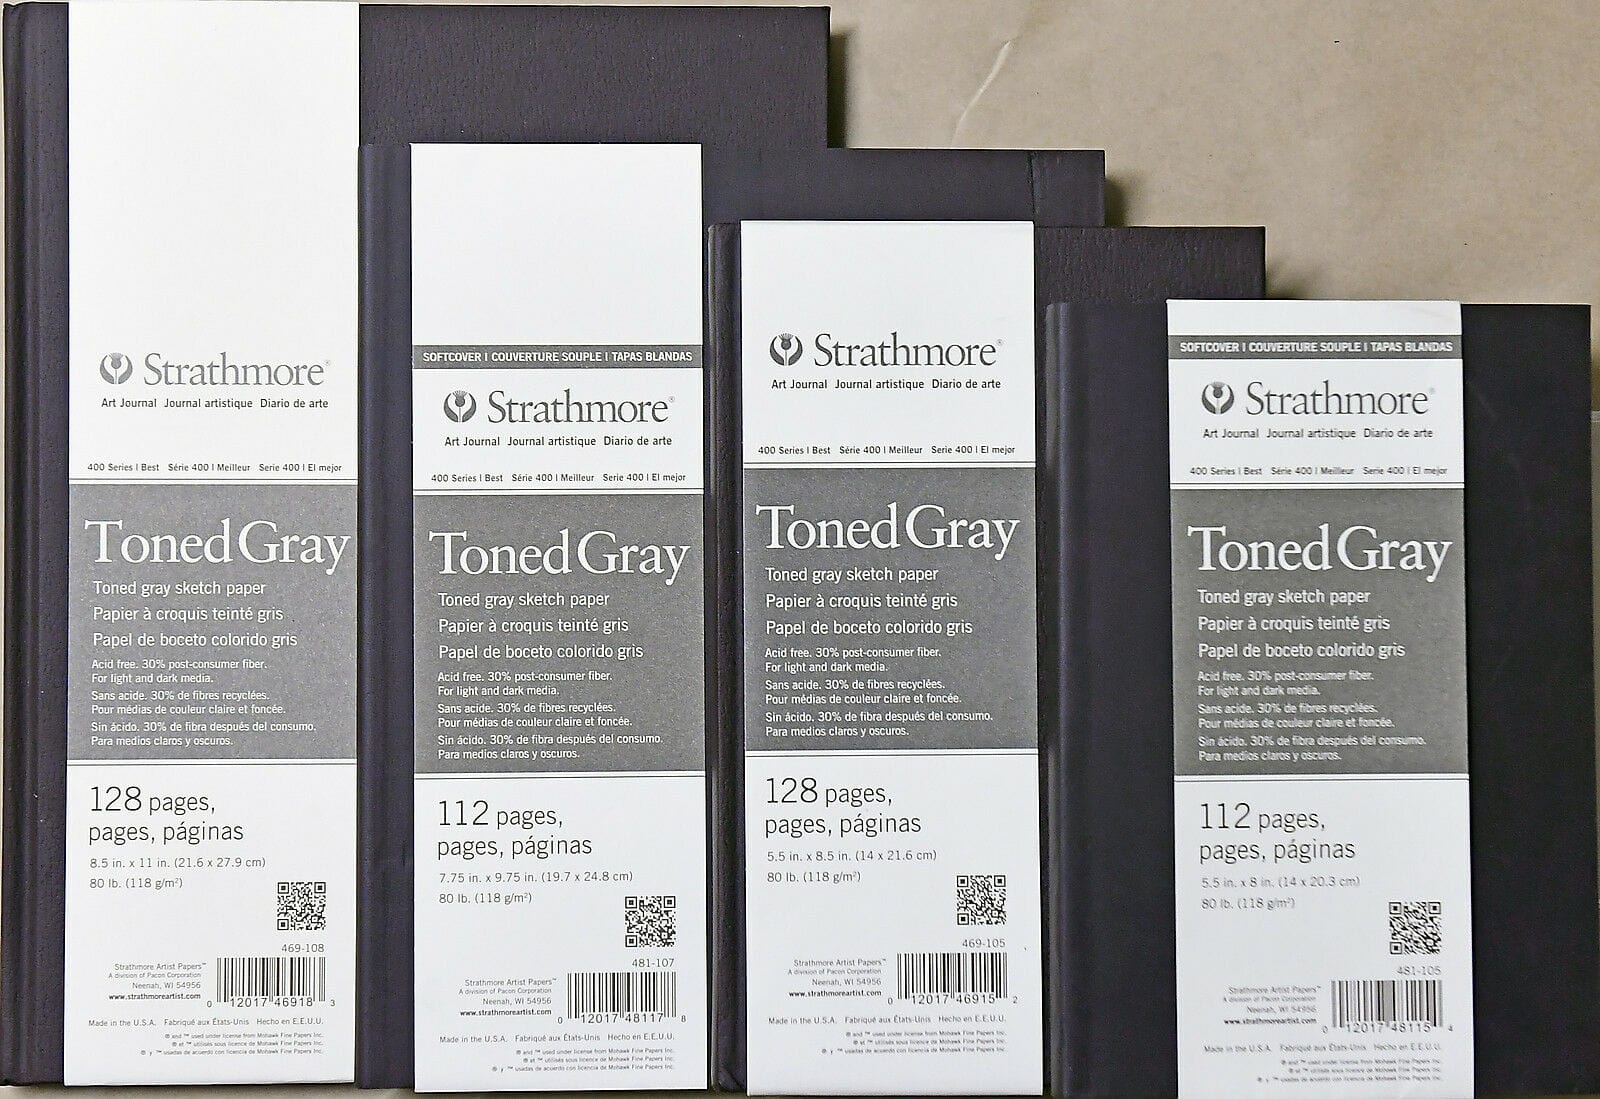 Strathmore 400 Series Toned Gray Paper review - The best grey